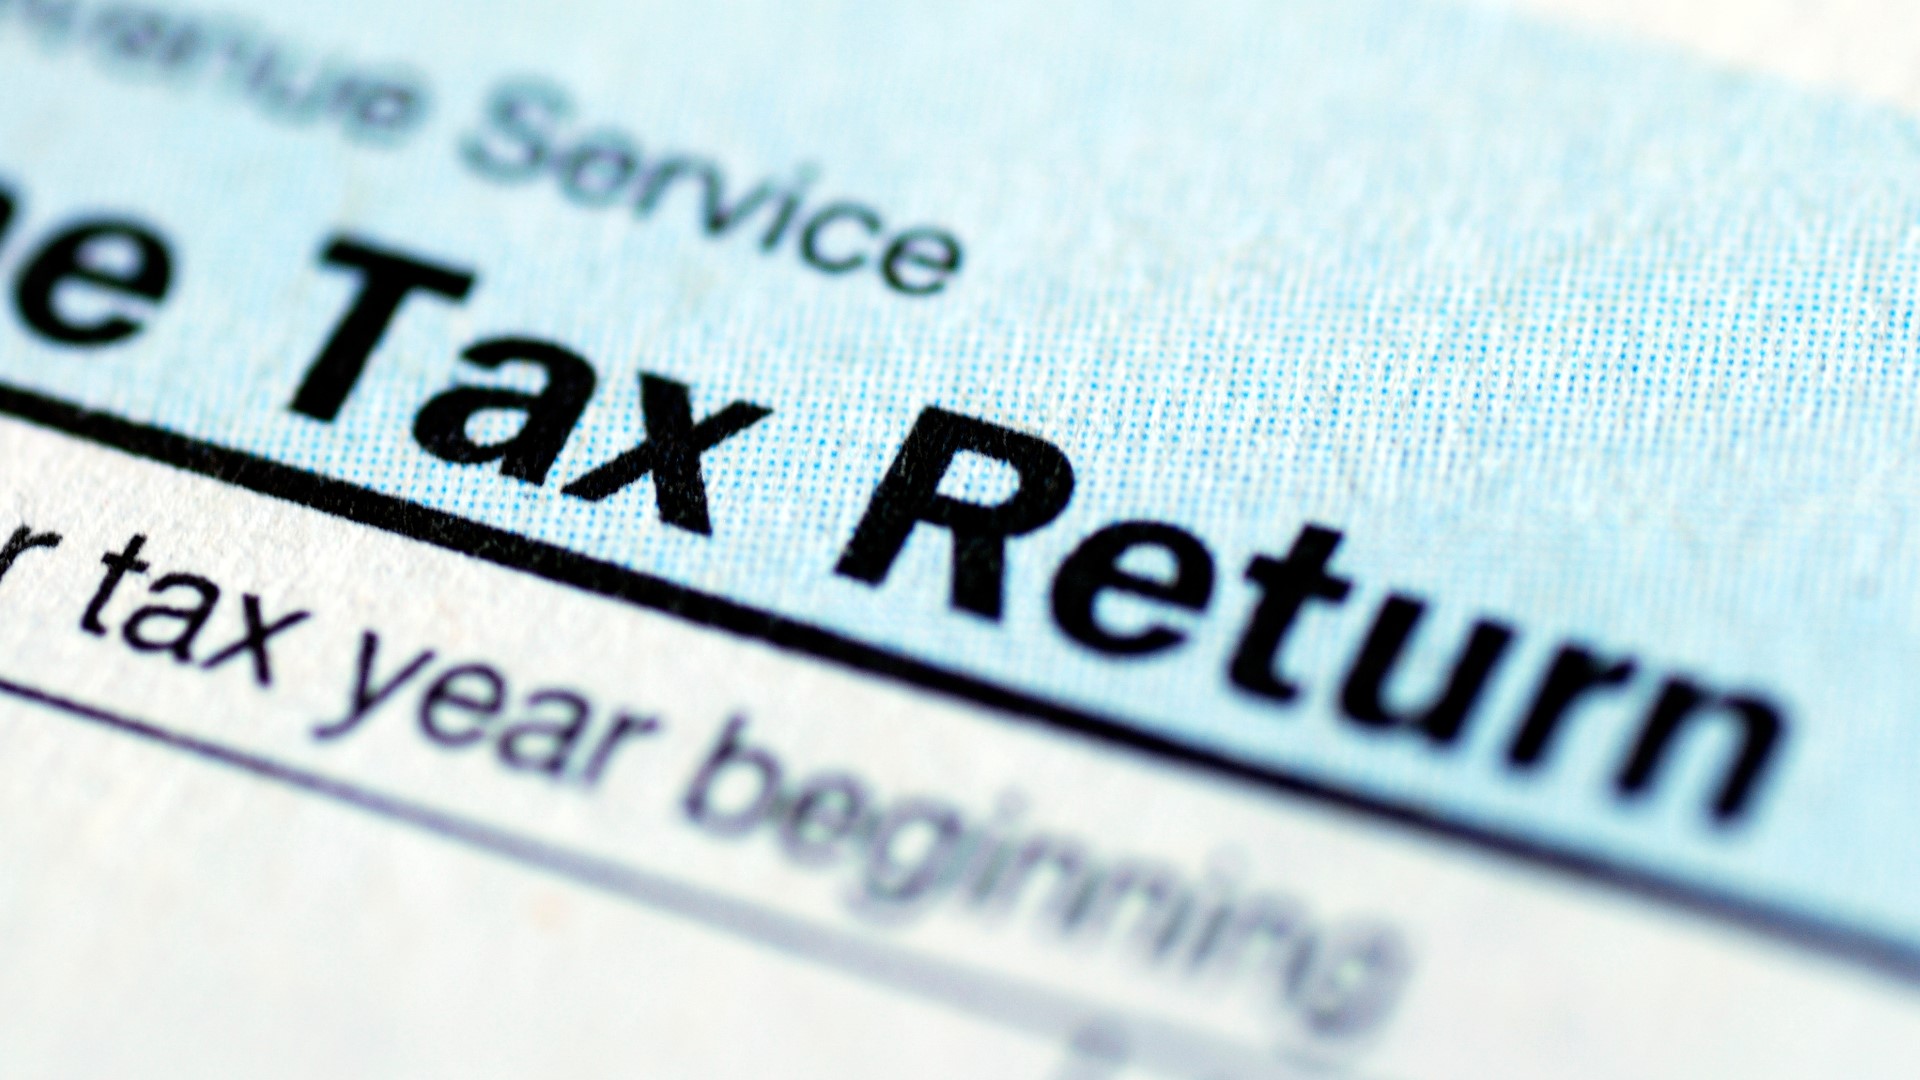 The IRS' Volunteer Income Tax Assistance Program, also known as VITA, is designed to help certain people access free income tax prep services.